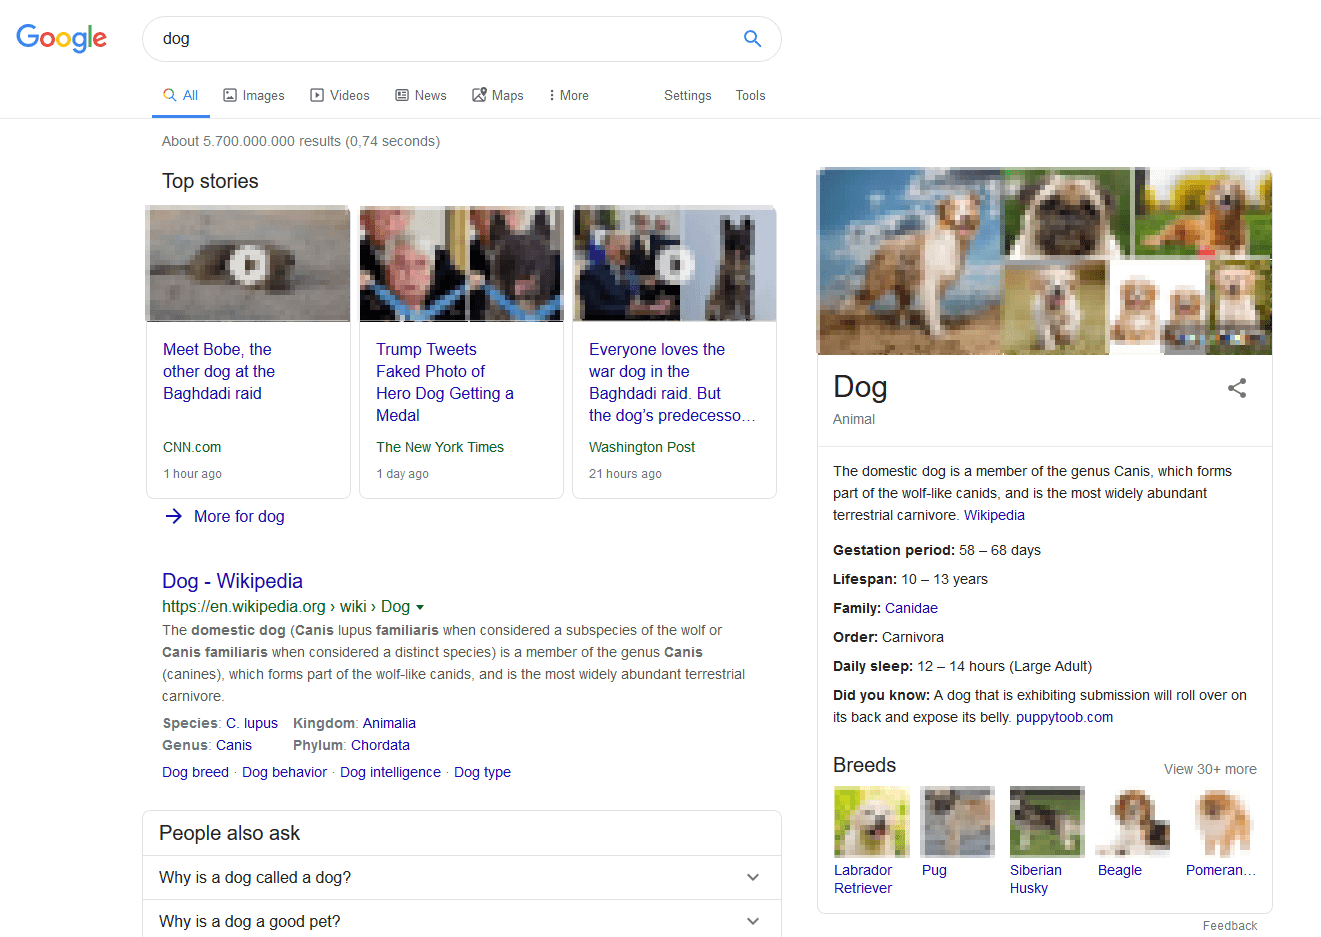 Google’s Knowledge Graph for the search query “dog”